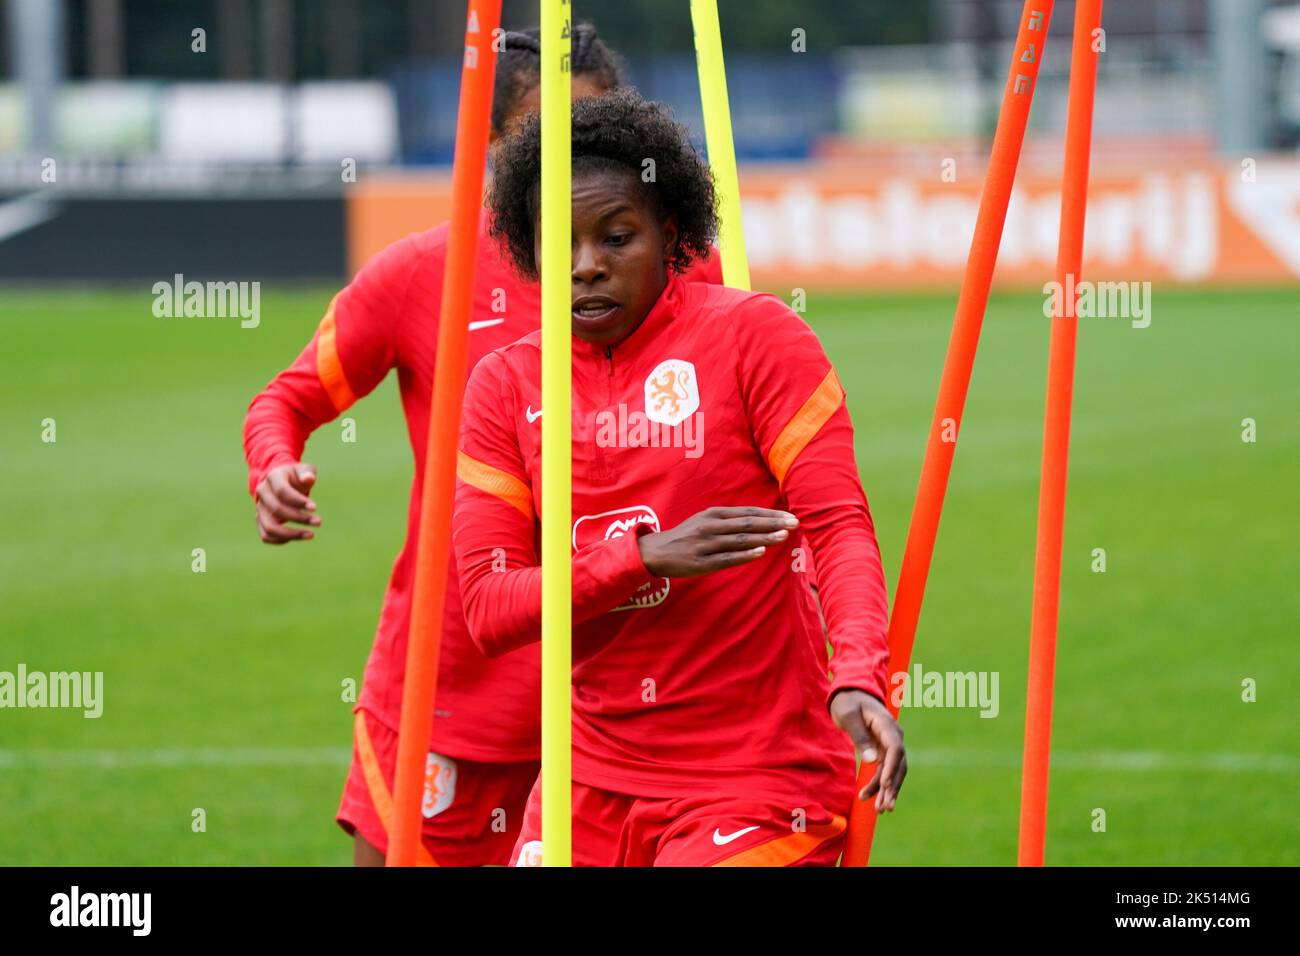 ZEIST, NETHERLANDS - OCTOBER 5: Lineth Beerensteyn of the Netherlands during a Training Session of the Netherlands Women’s Football Team at the KNVB Campus on October 5, 2022 in Zeist, Netherlands (Photo by Jeroen Meuwsen/Orange Pictures) Stock Photo